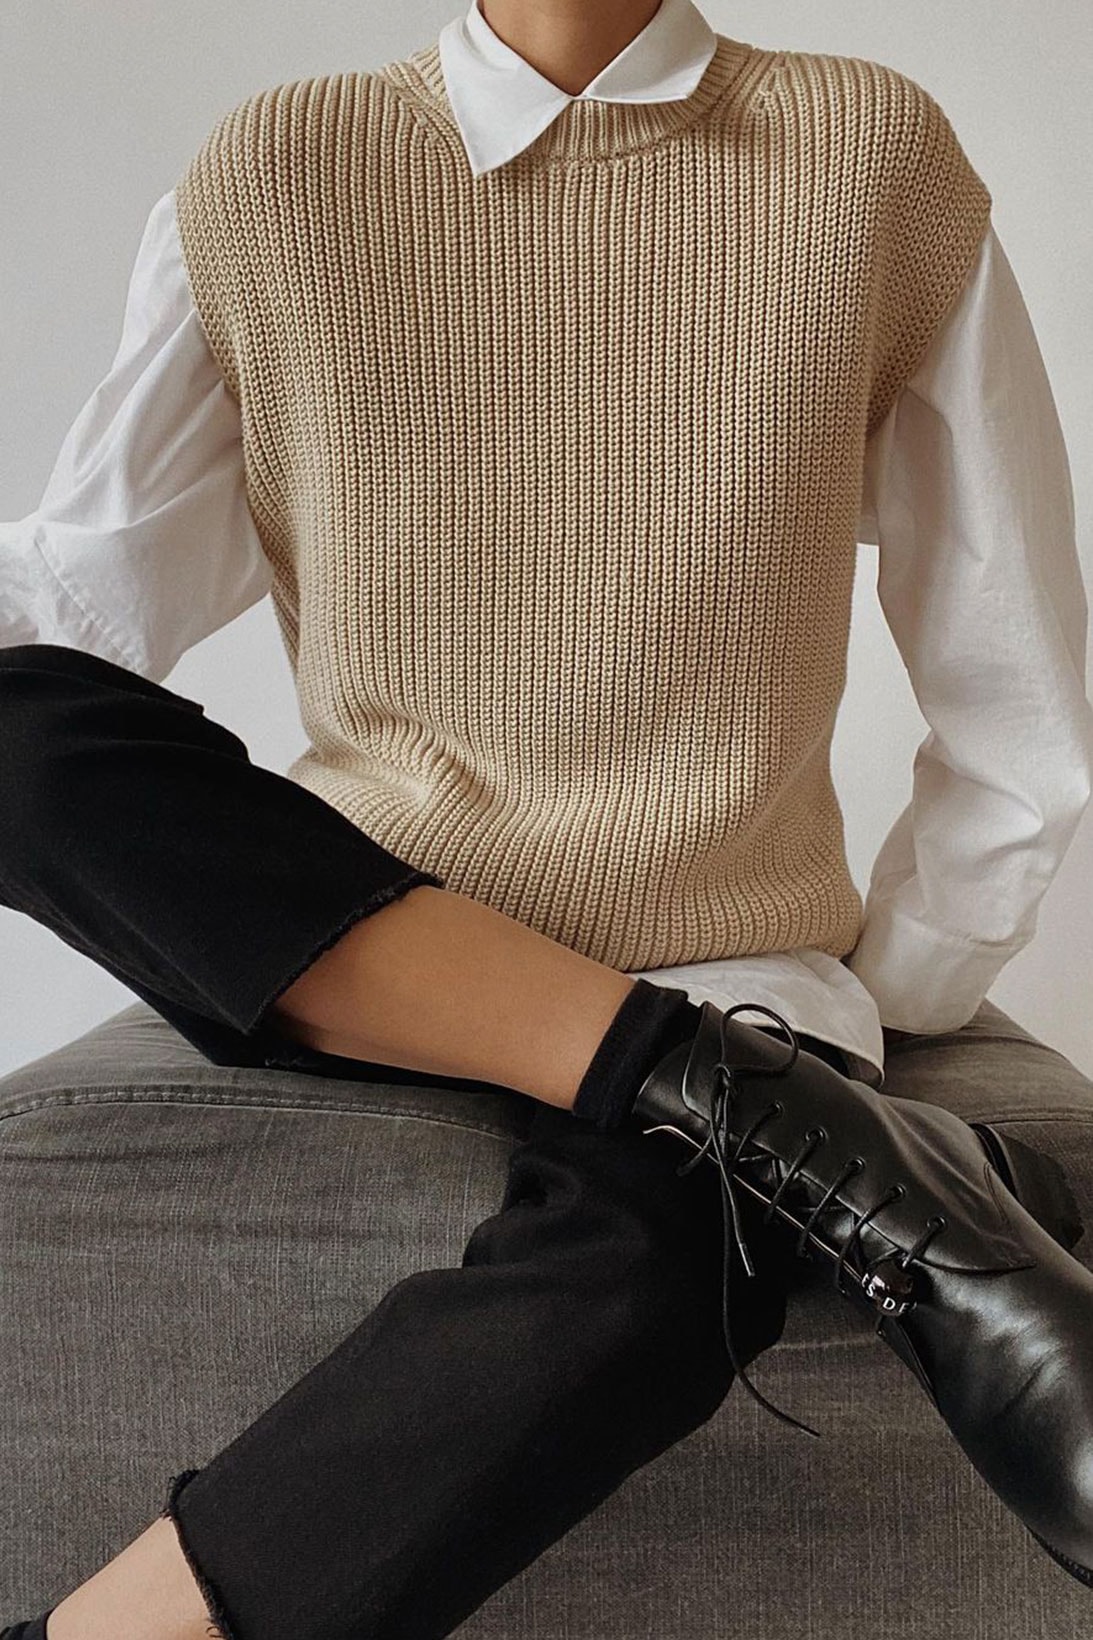 5 Sweater Vest Outfit Ideas to Wear and Shop Now